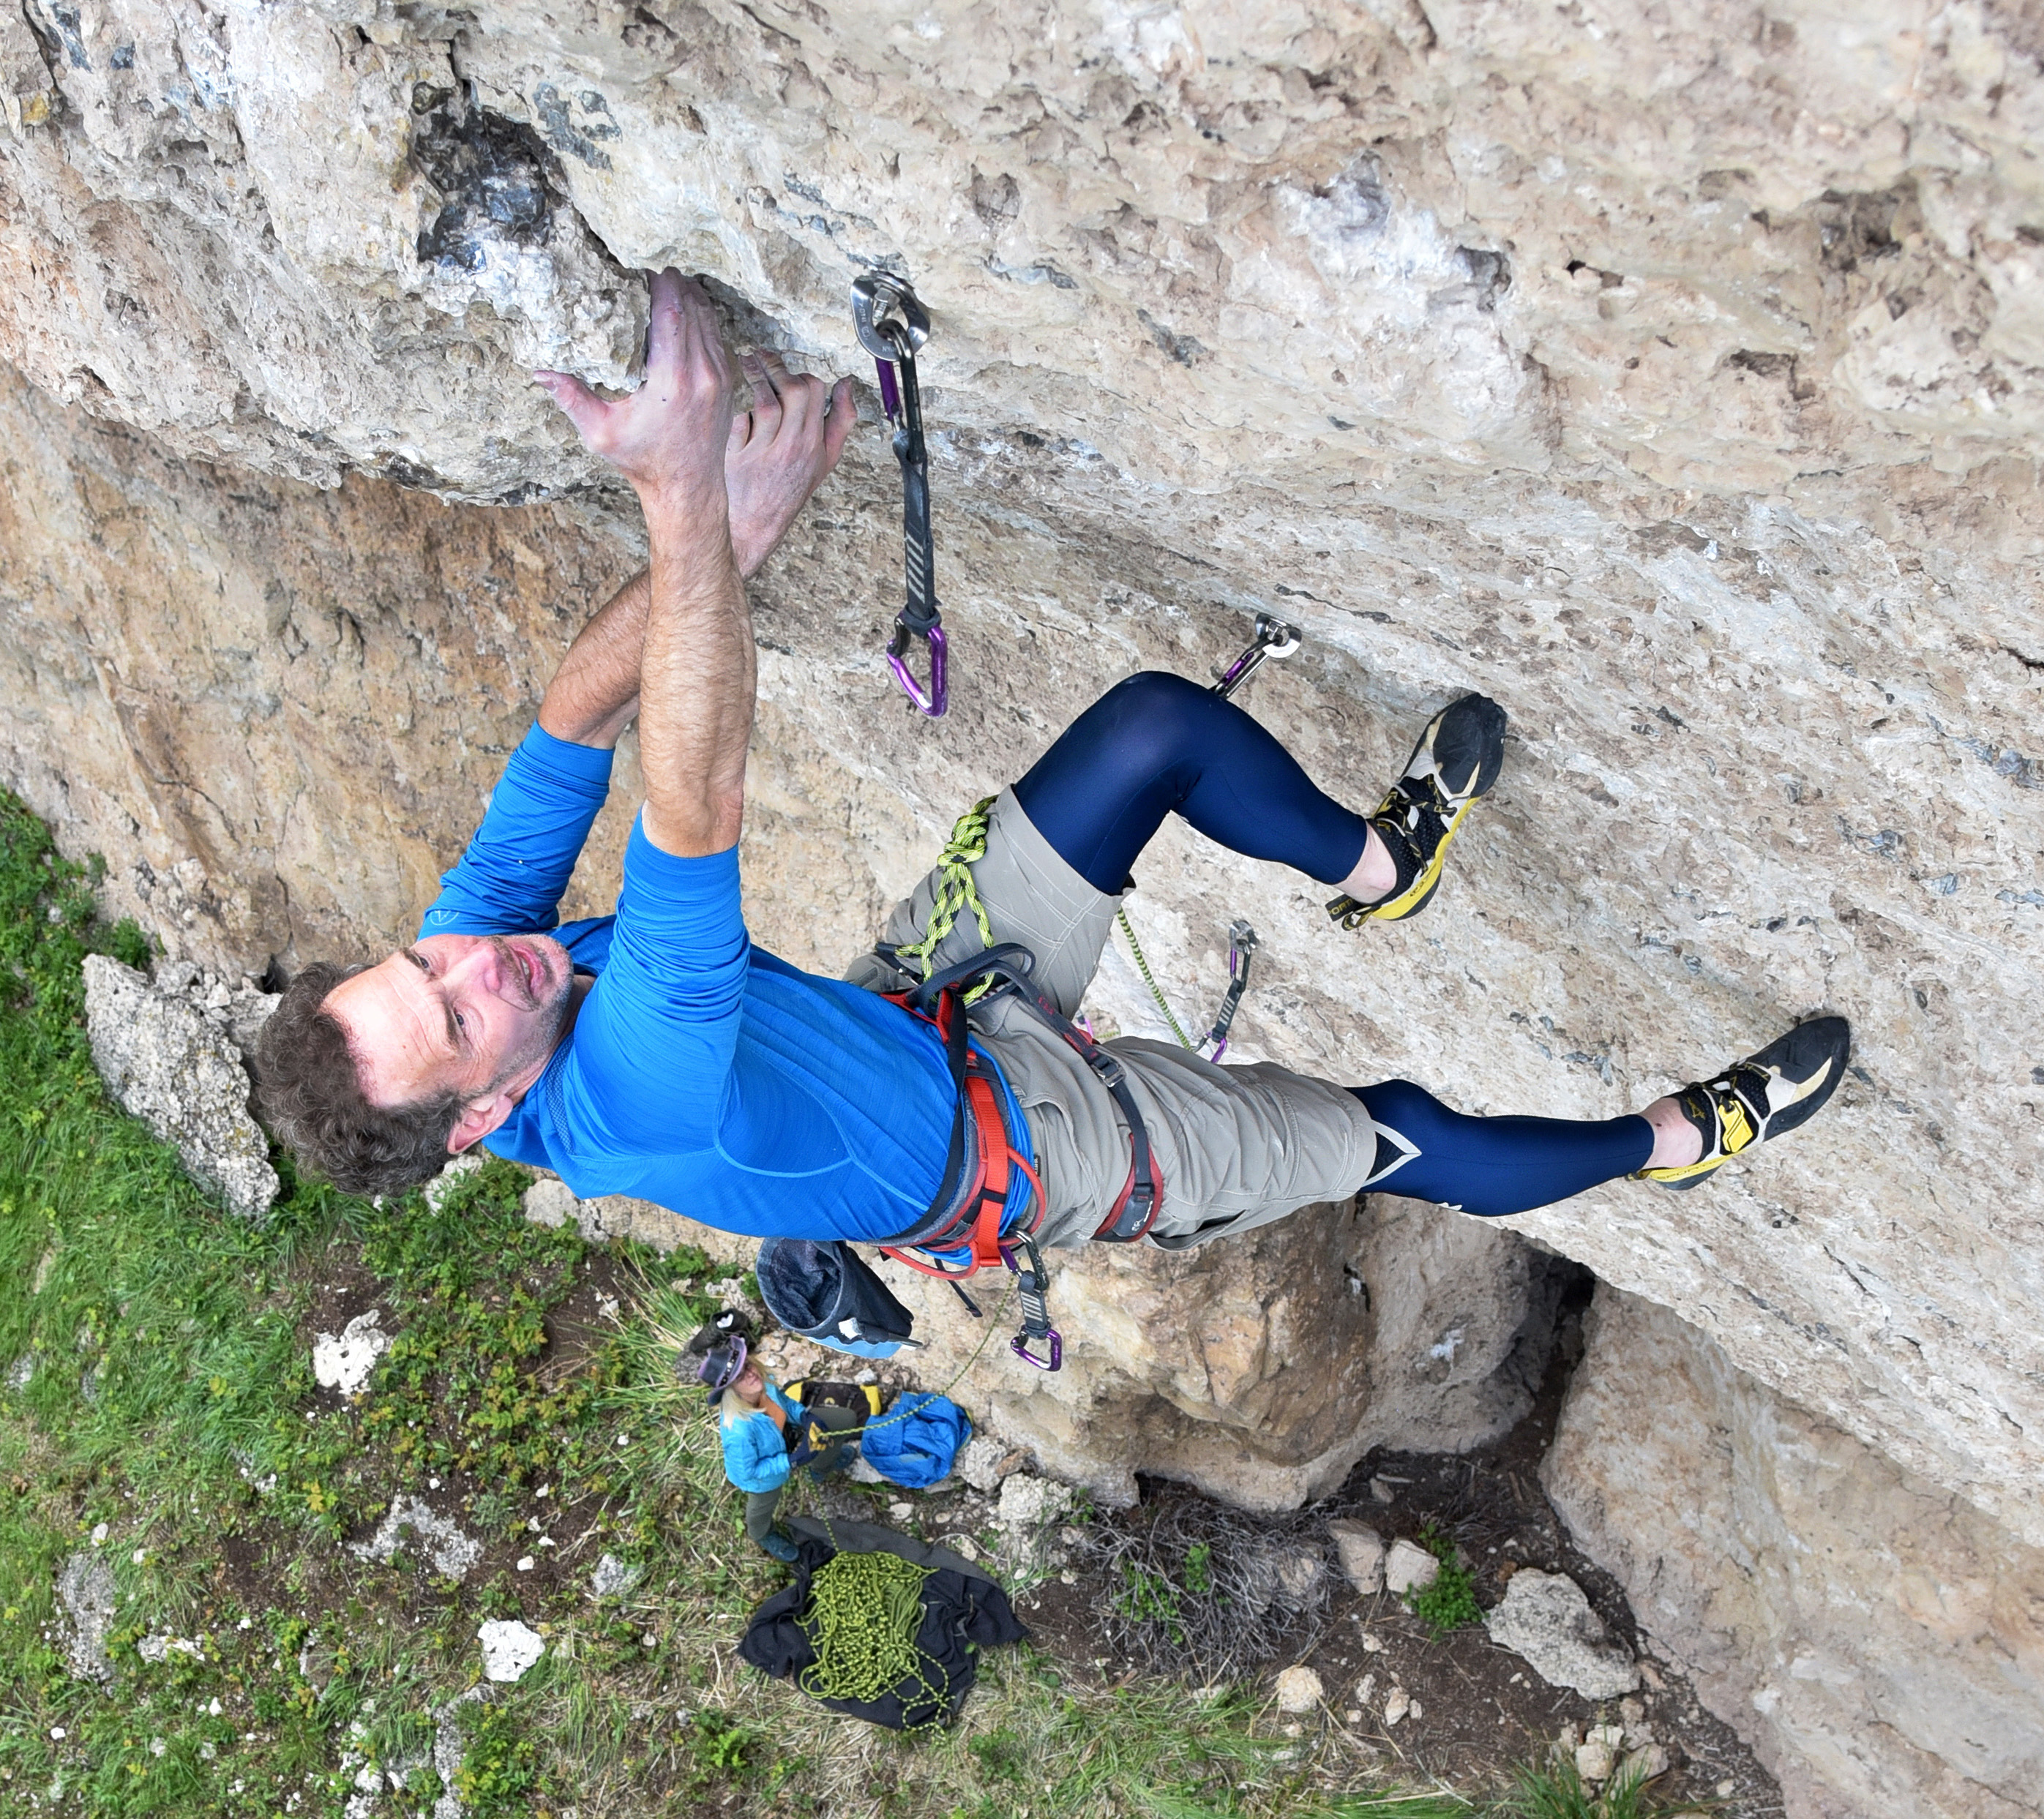 Eric on the first ascent of "The Scarn" (5.12b), Ten Sleep Canyon, WY. Photo: Eric Hörst collection